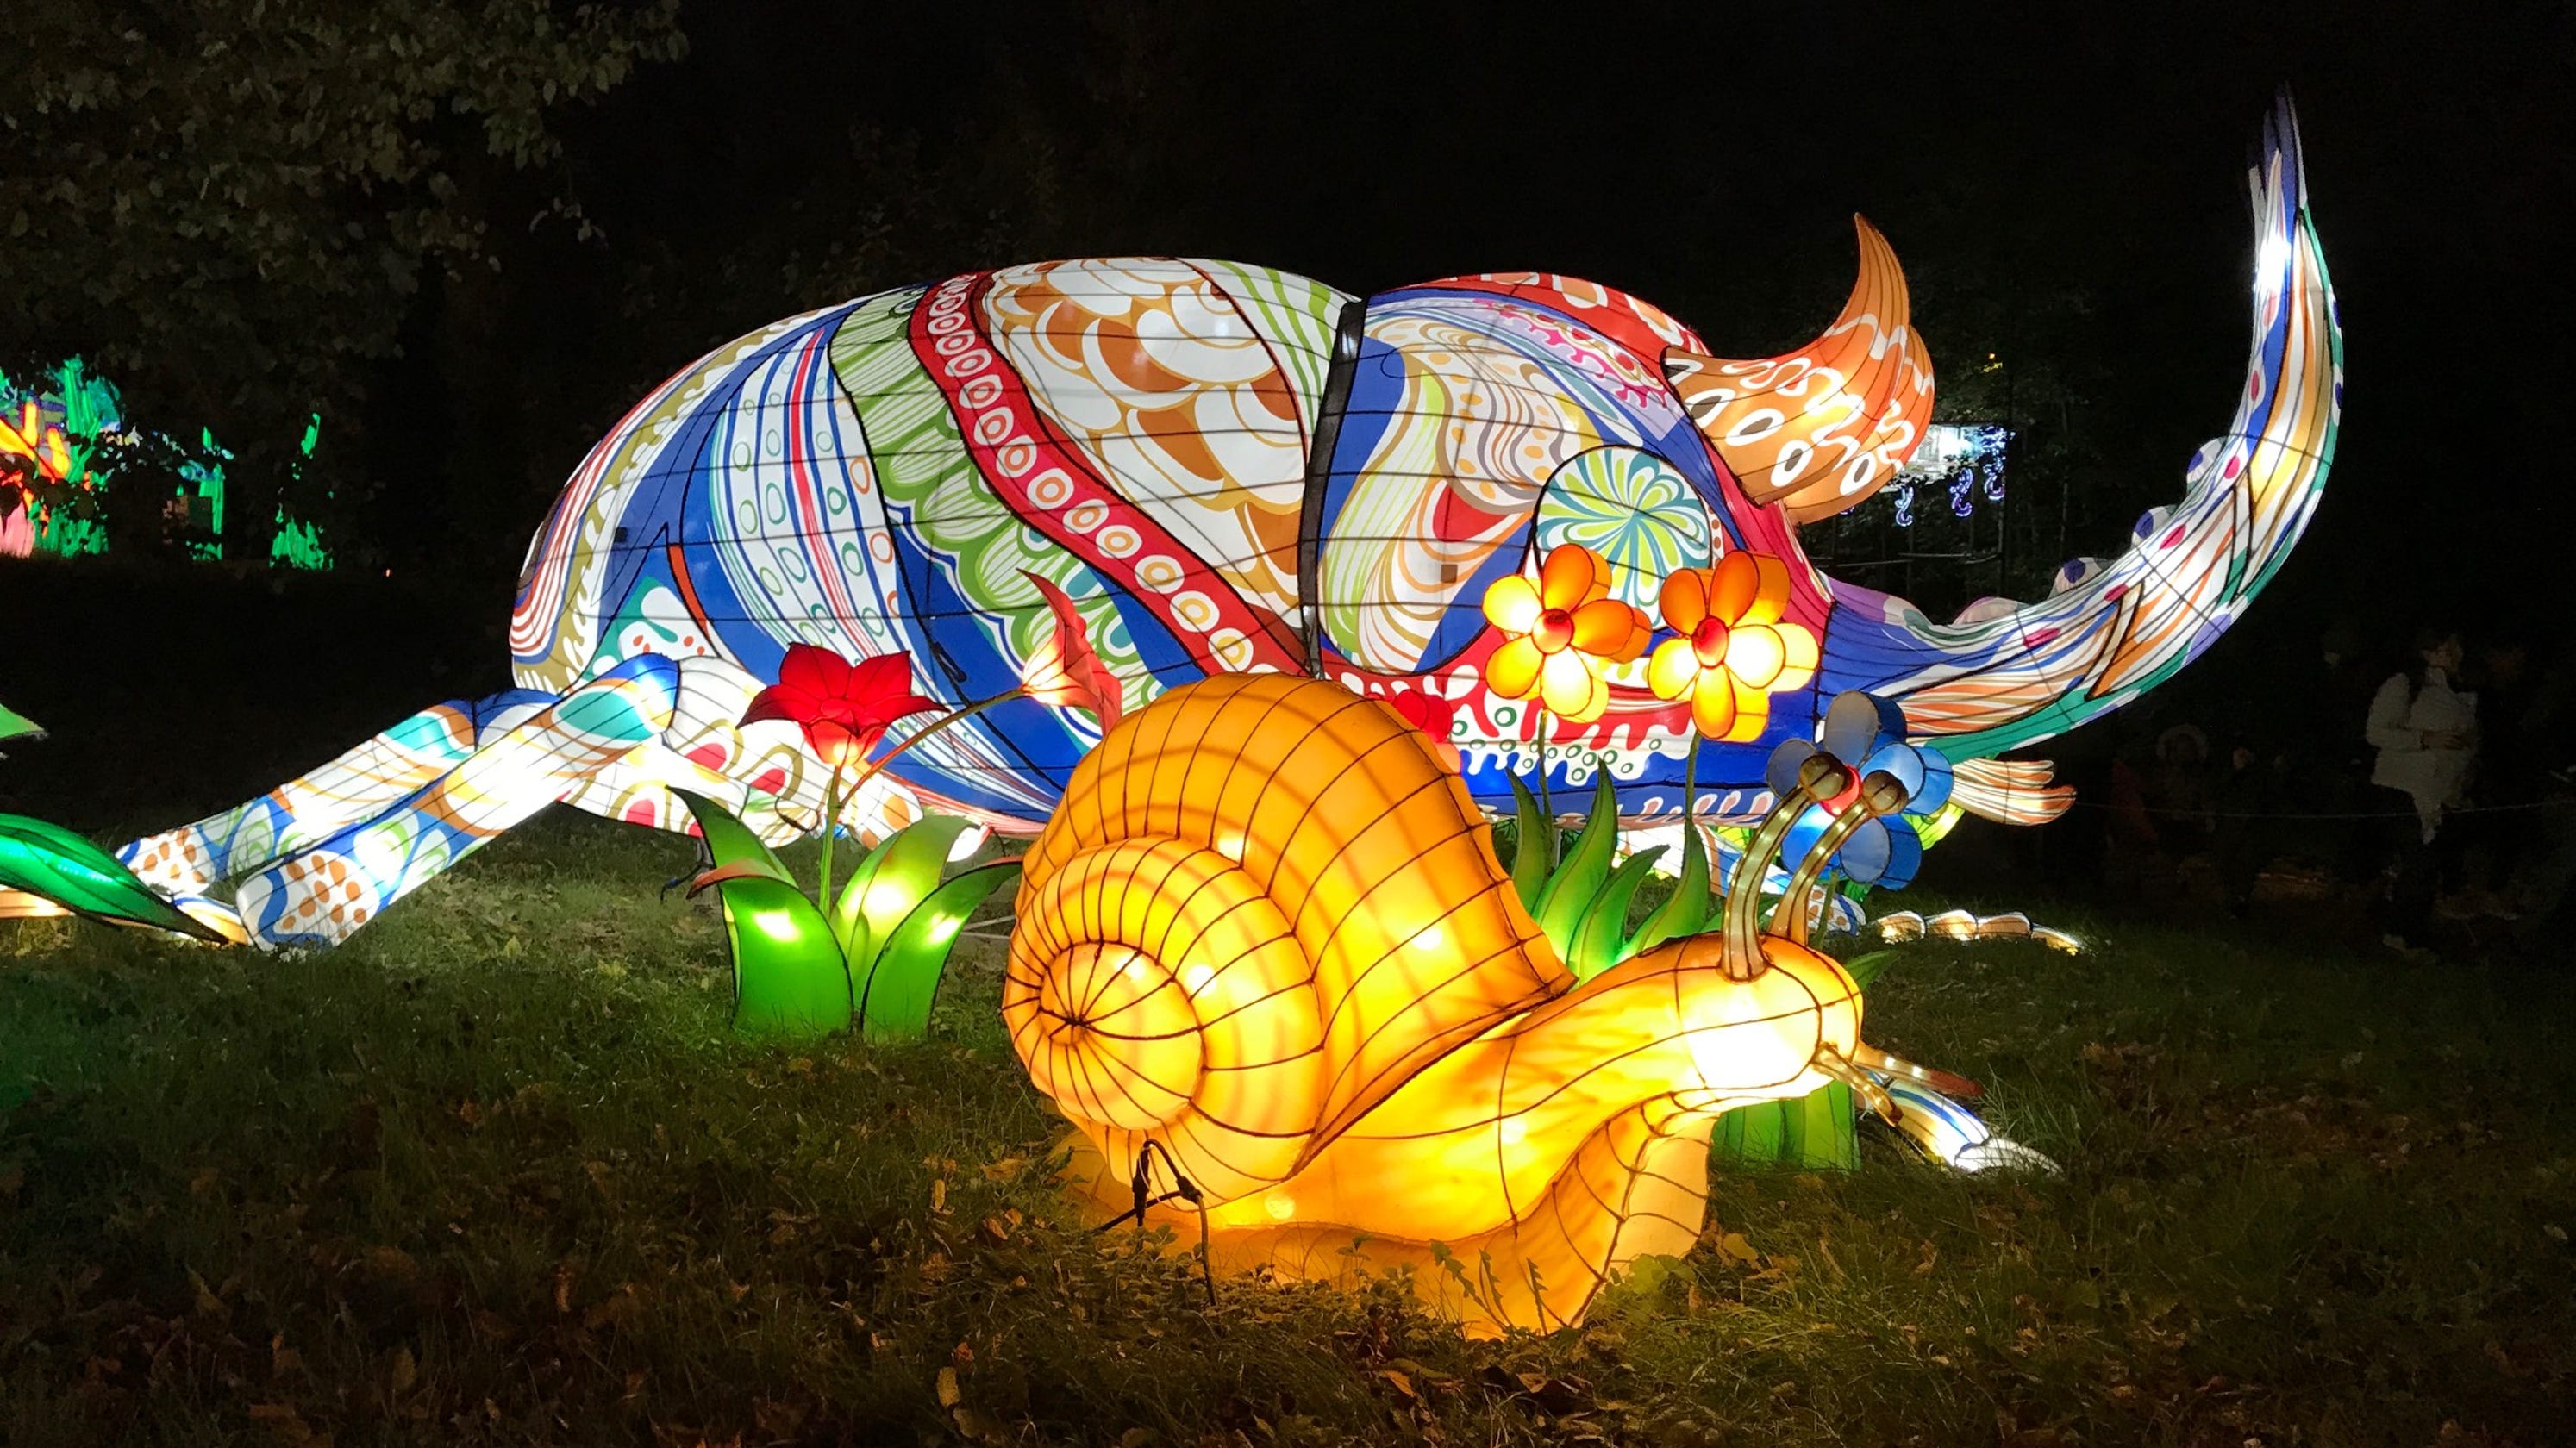 China Lights festival returning to Milwaukee this fall